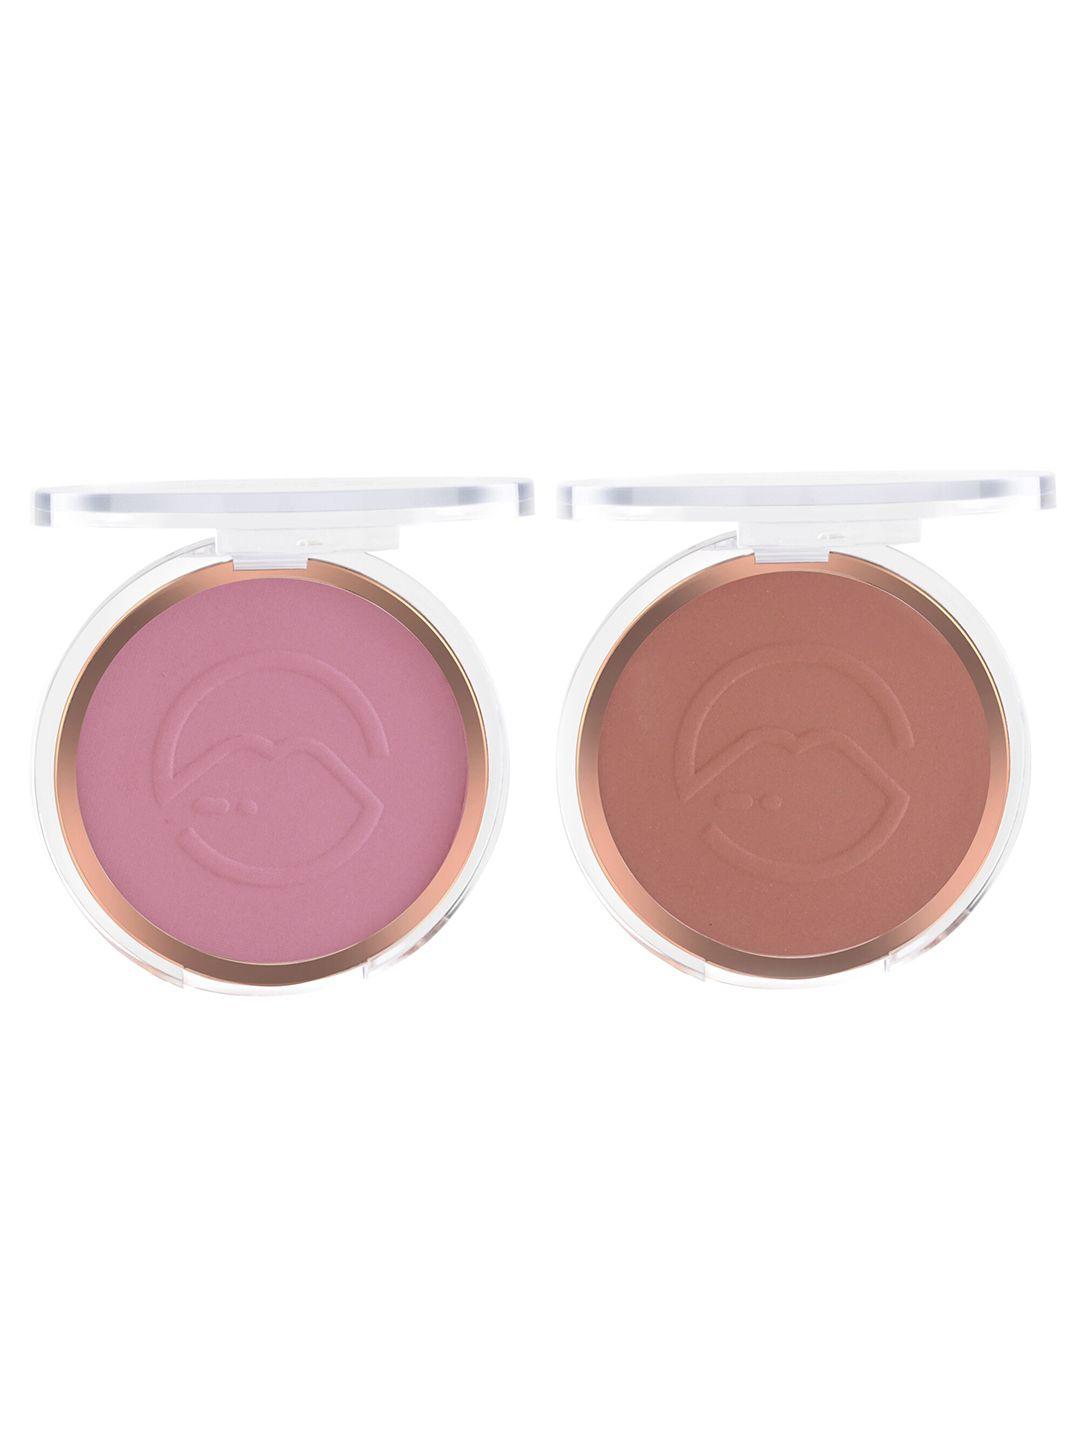 mars set of 2 flush of love highly pigmented matte face blusher - shade 02 & 05